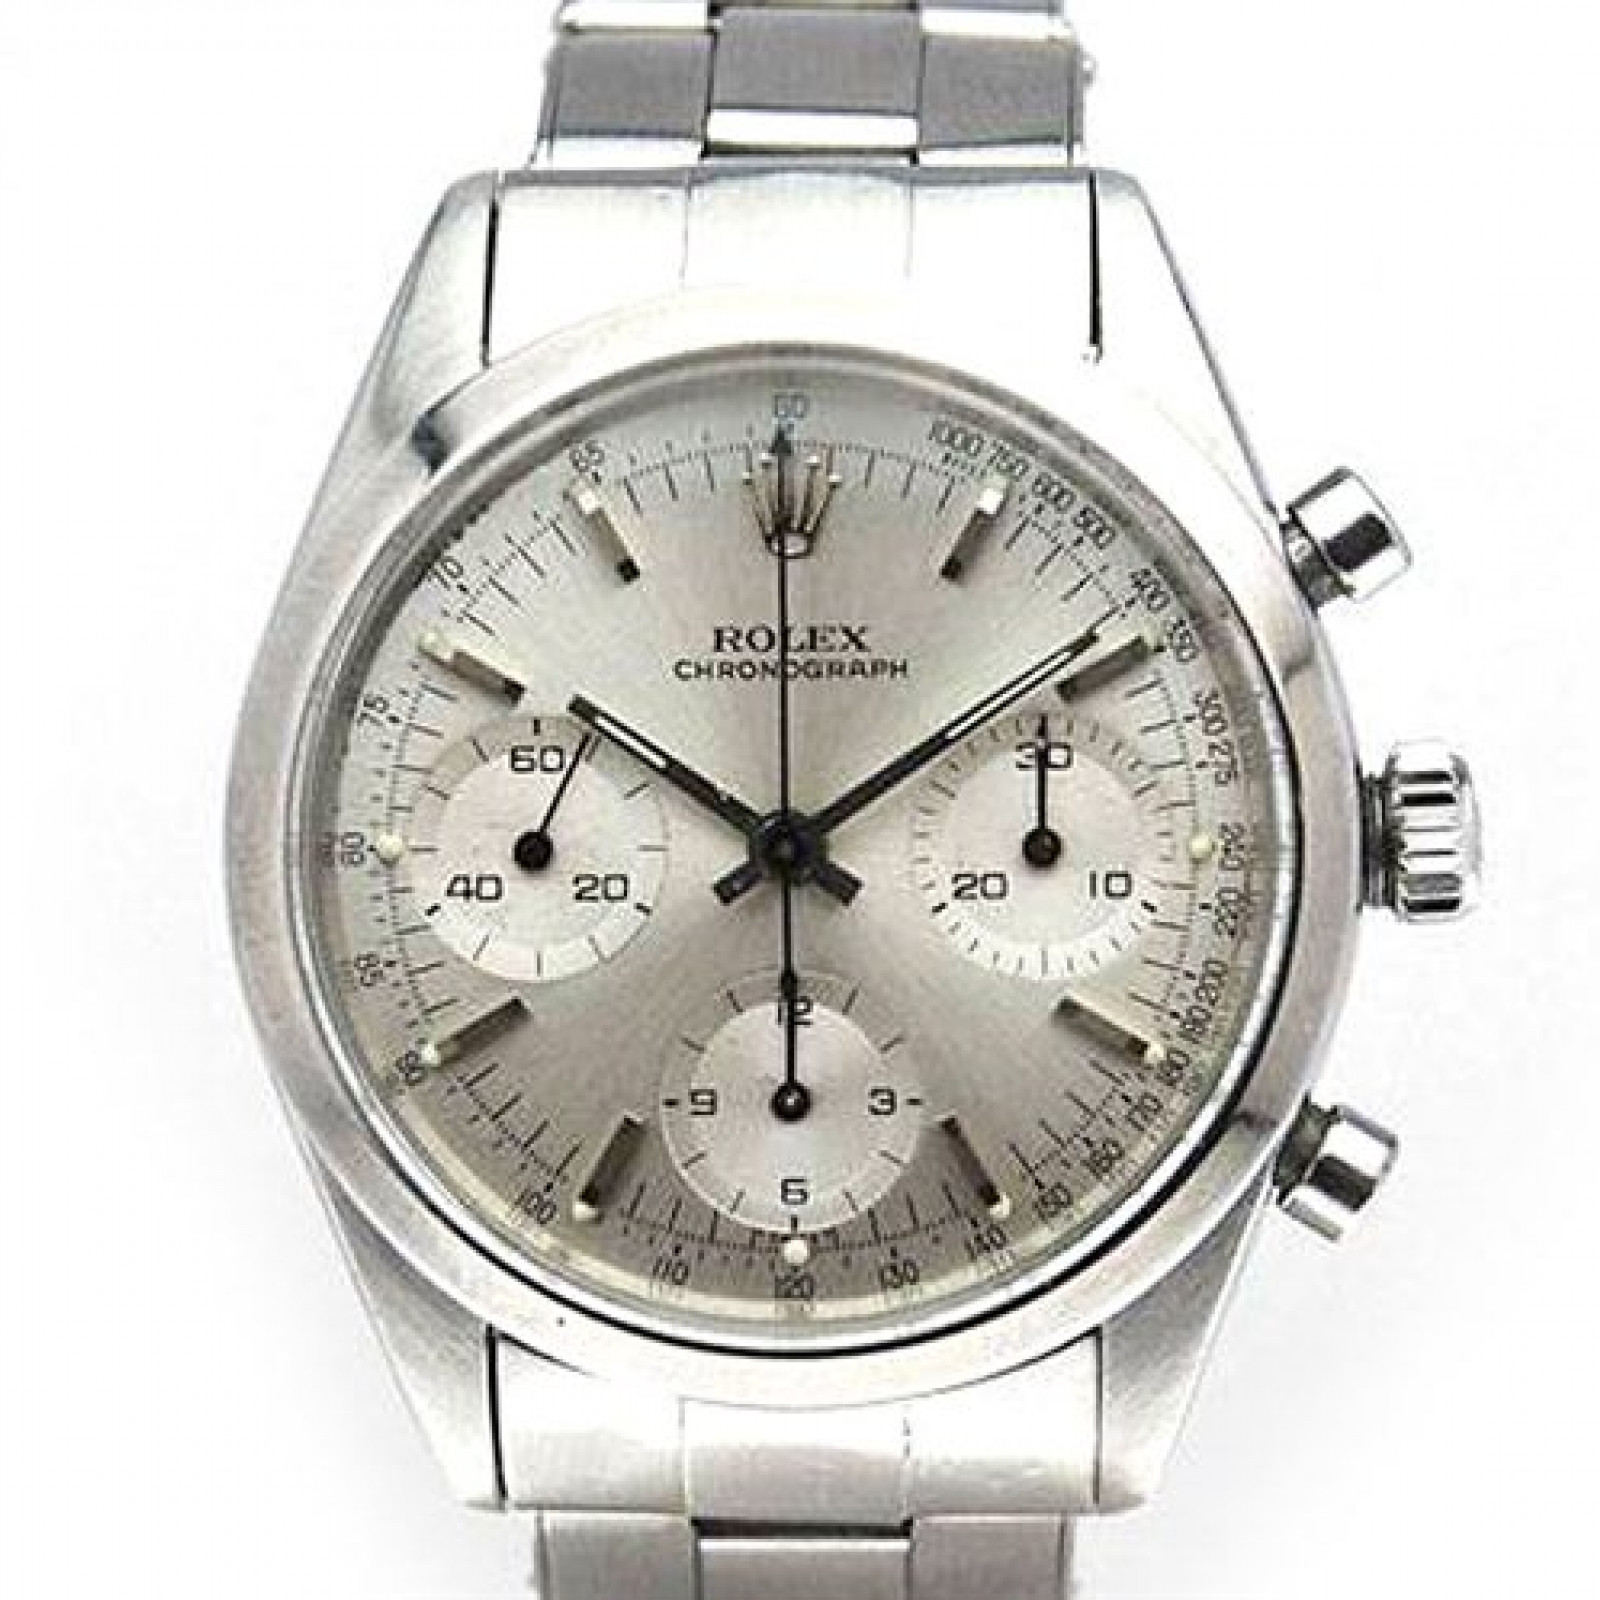 Vintage Rolex Chronograph 6238 Steel with Silver Dial